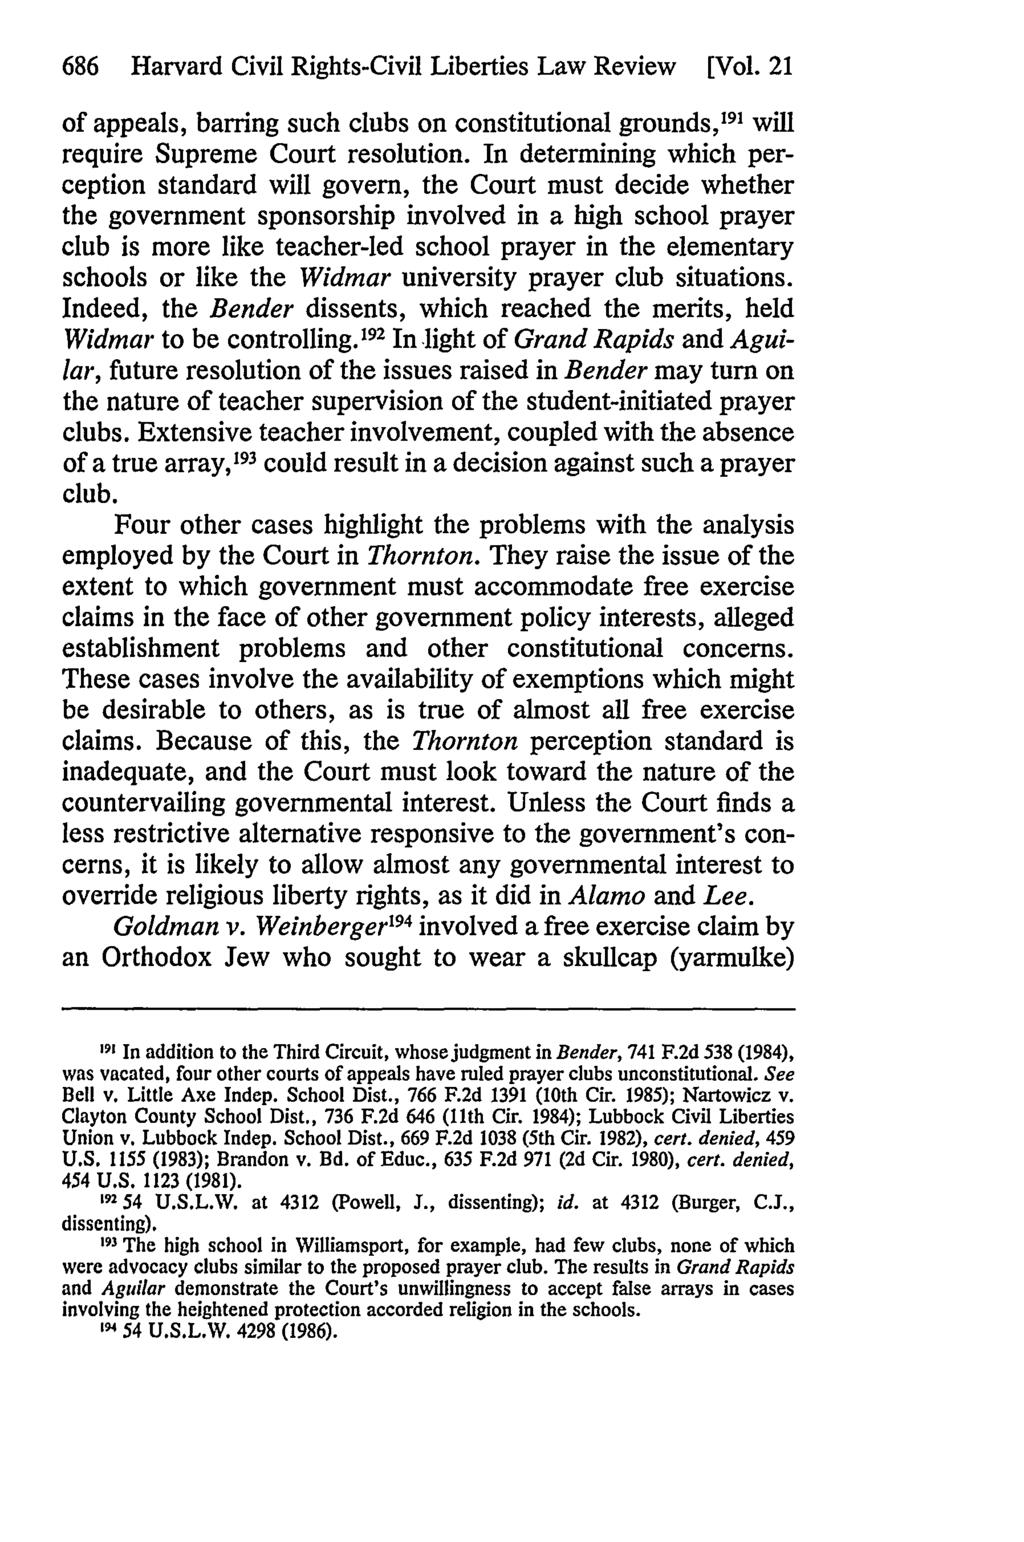 686 Harvard Civil Rights-Civil Liberties Law Review [Vol. 21 of appeals, barring such clubs on constitutional grounds, 191 will require Supreme Court resolution.